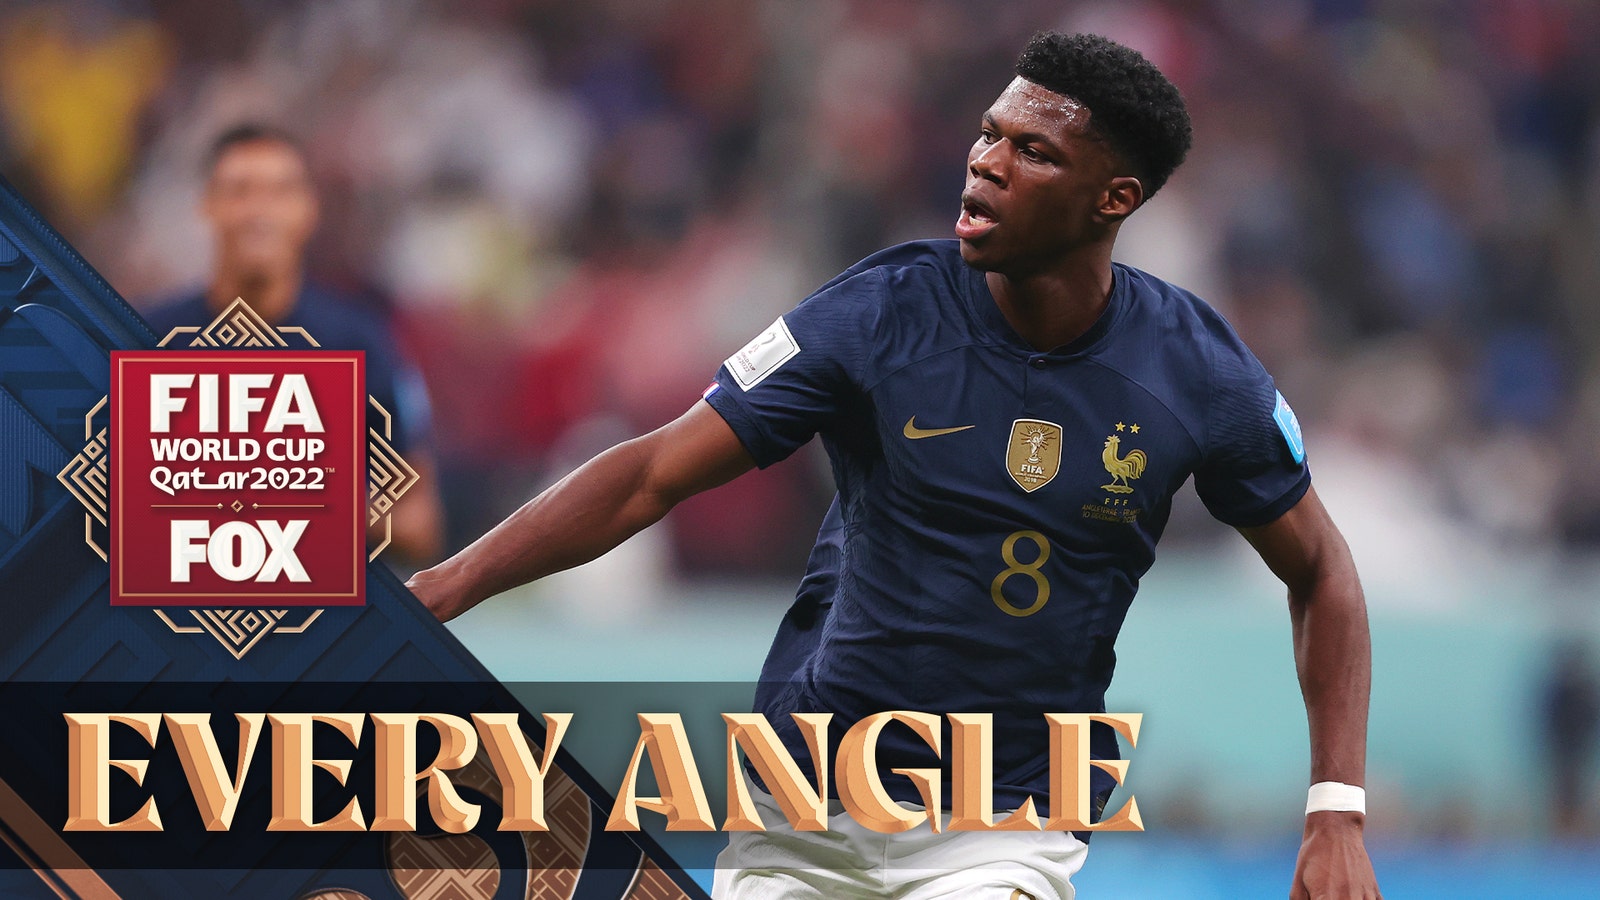 Aurelien Tchoameni makes a statement after scoring for France in the 2022 World Cup |  every corner